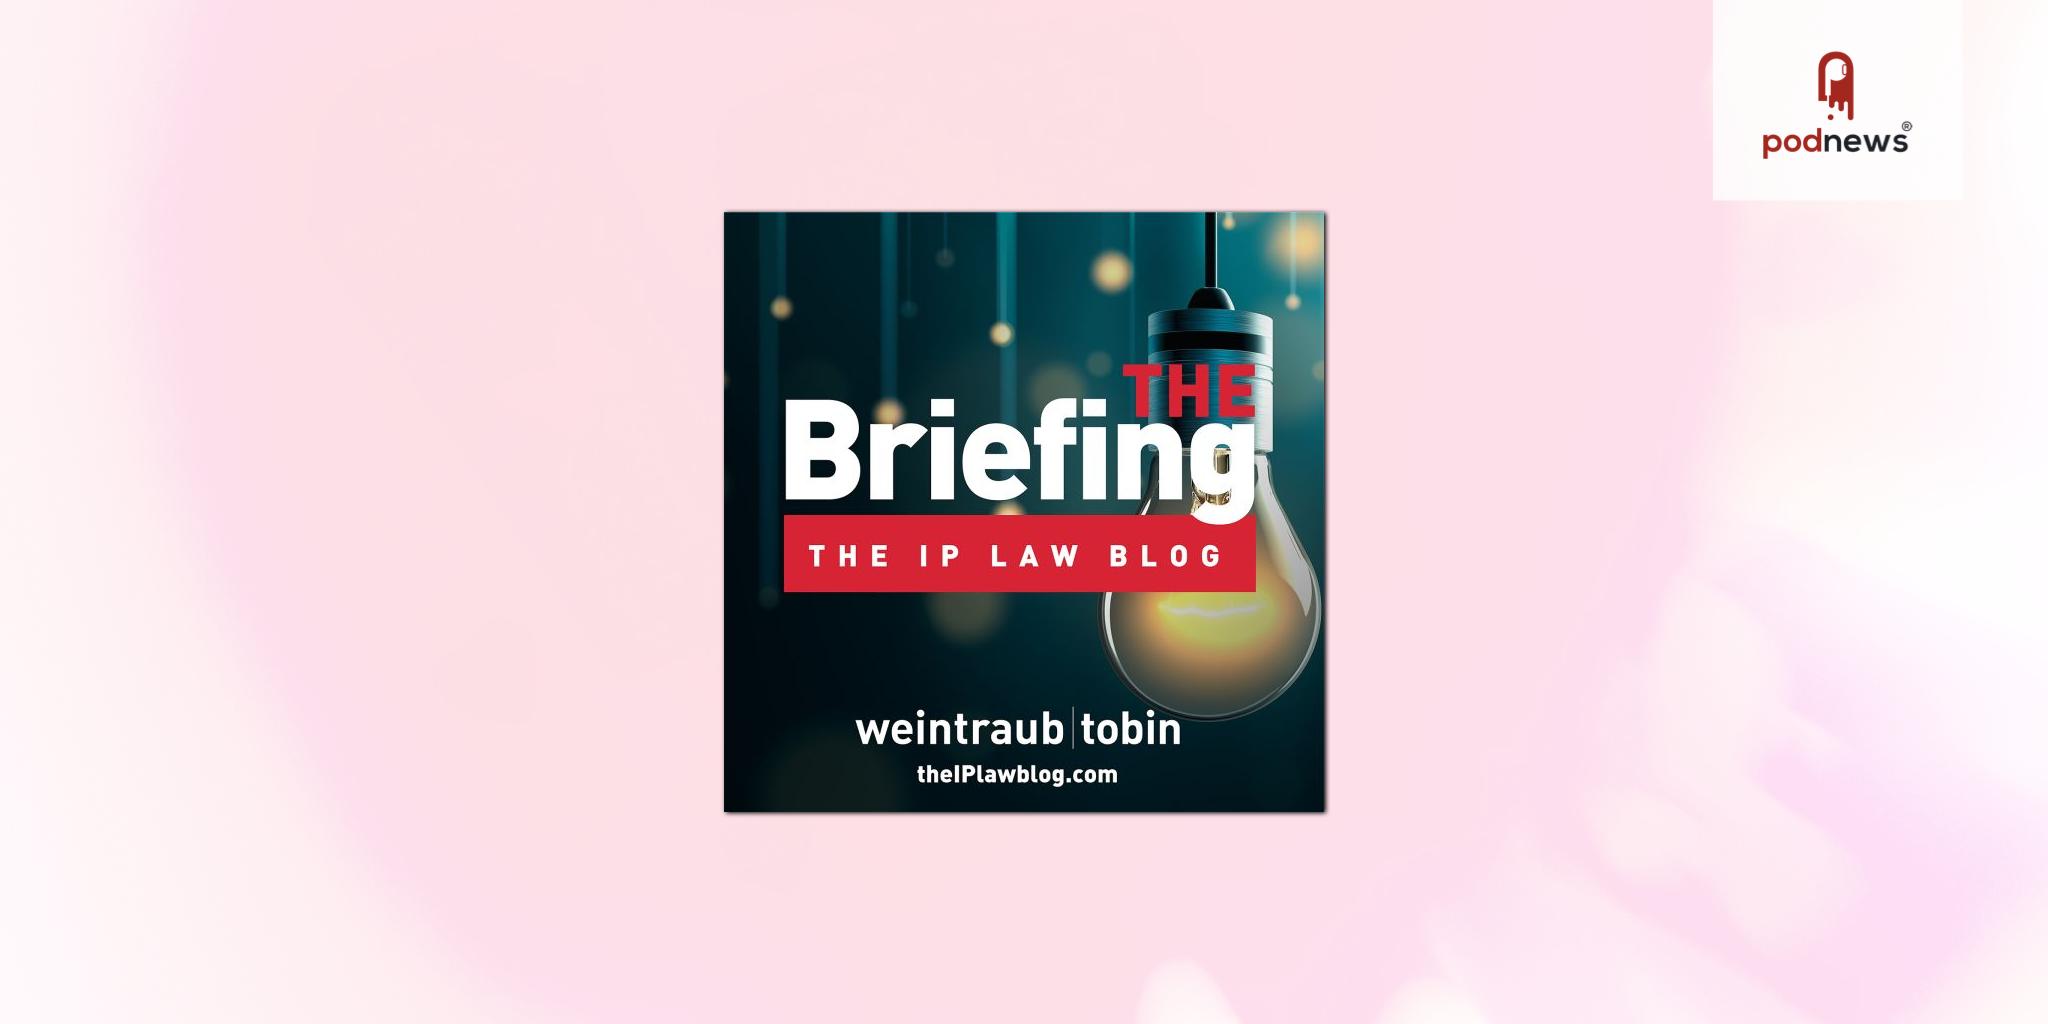 Intellectual Property Podcast “The Briefing” Hits 100th Episode Milestone